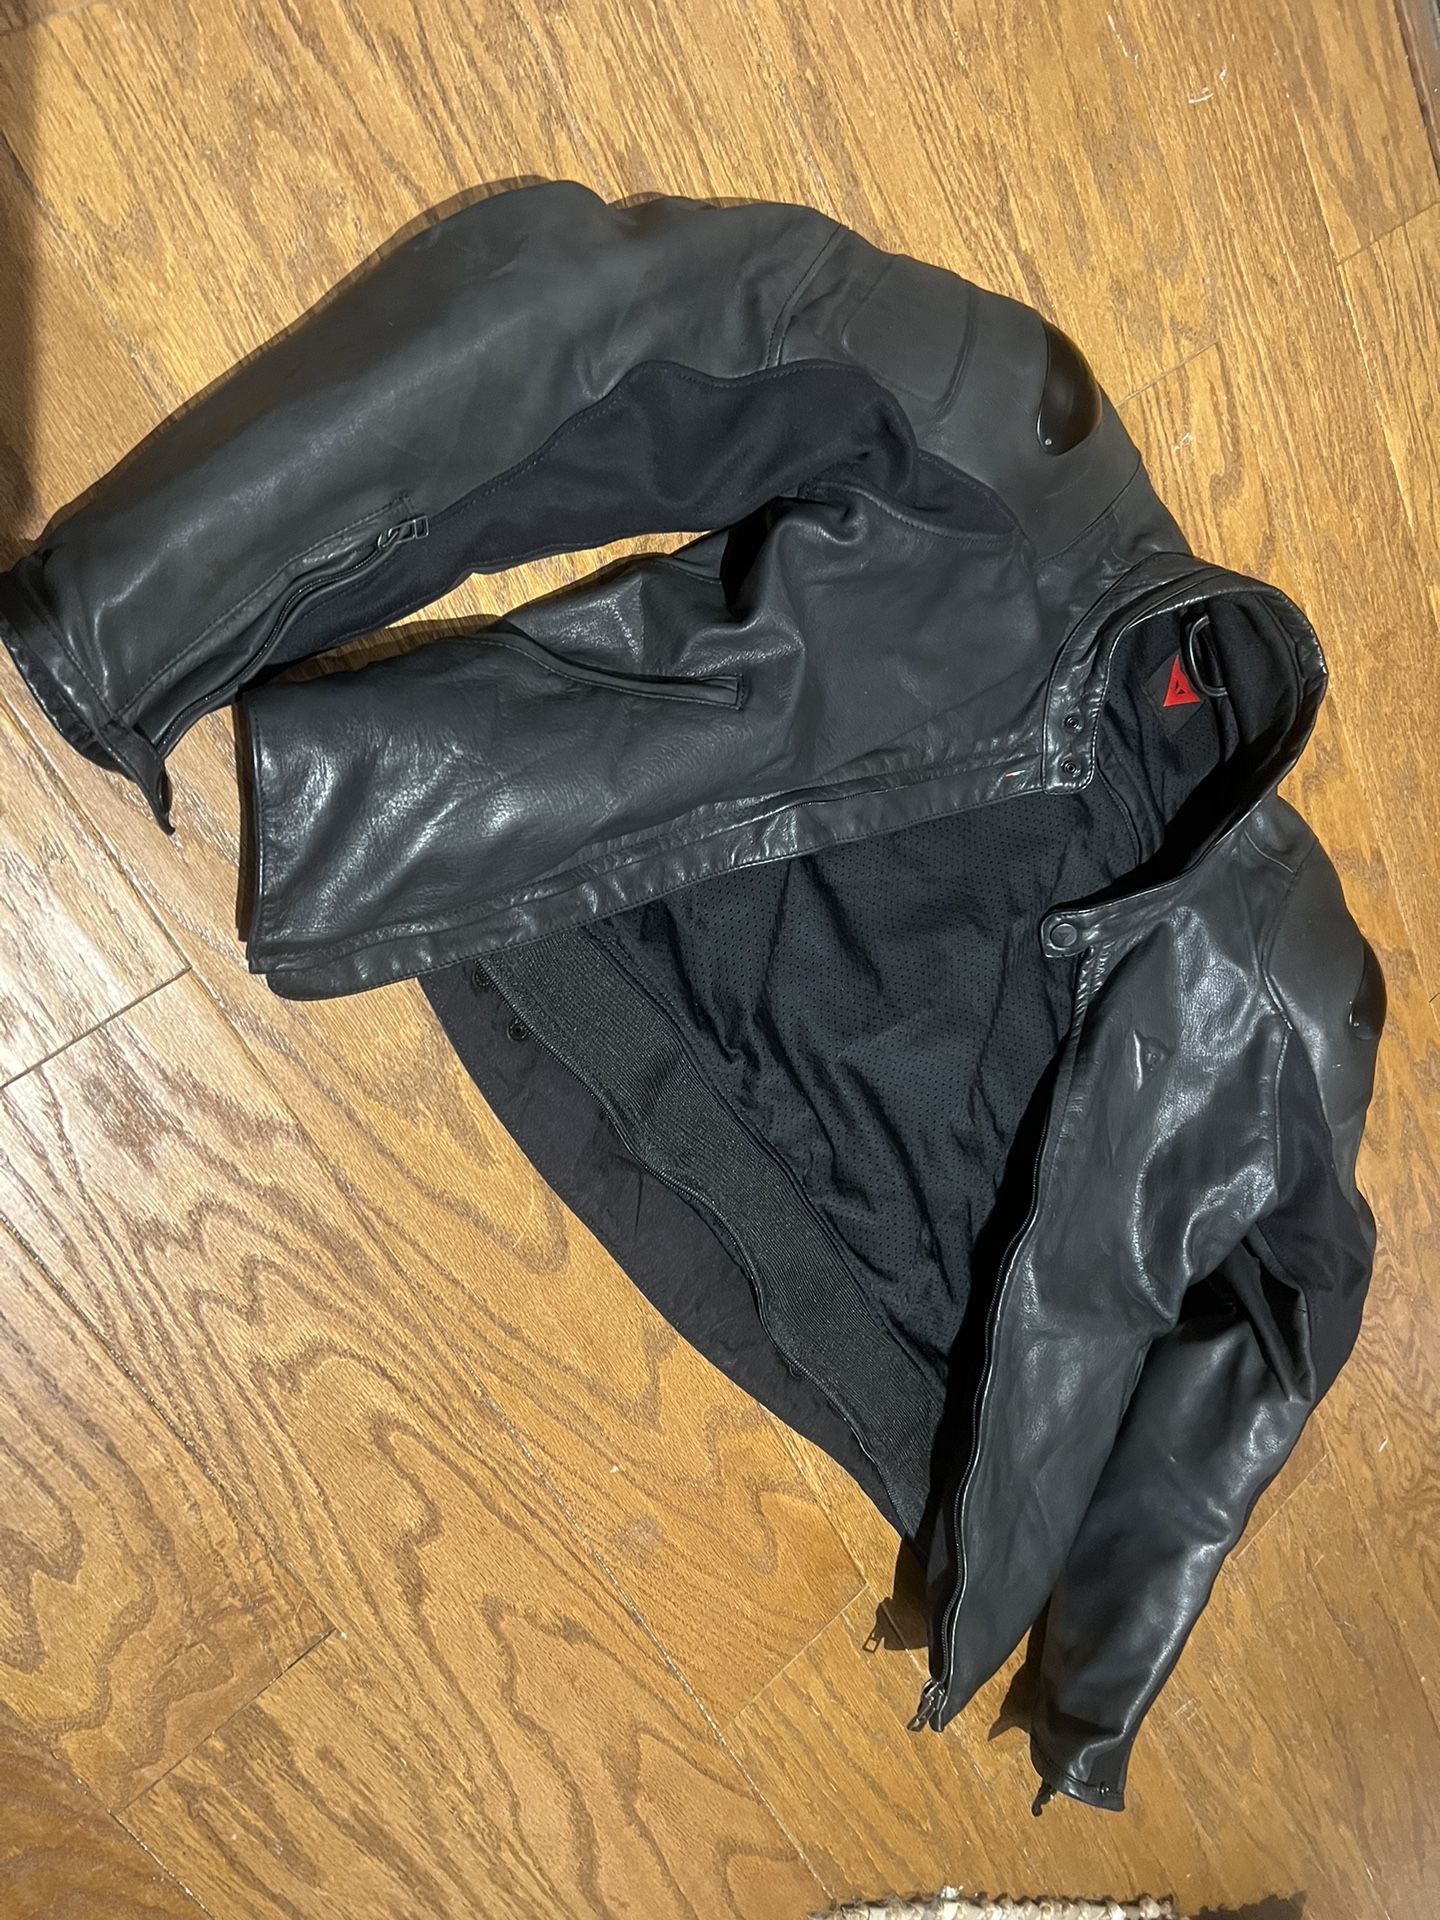 Black Leather Motorcycle Jacket With Pads.